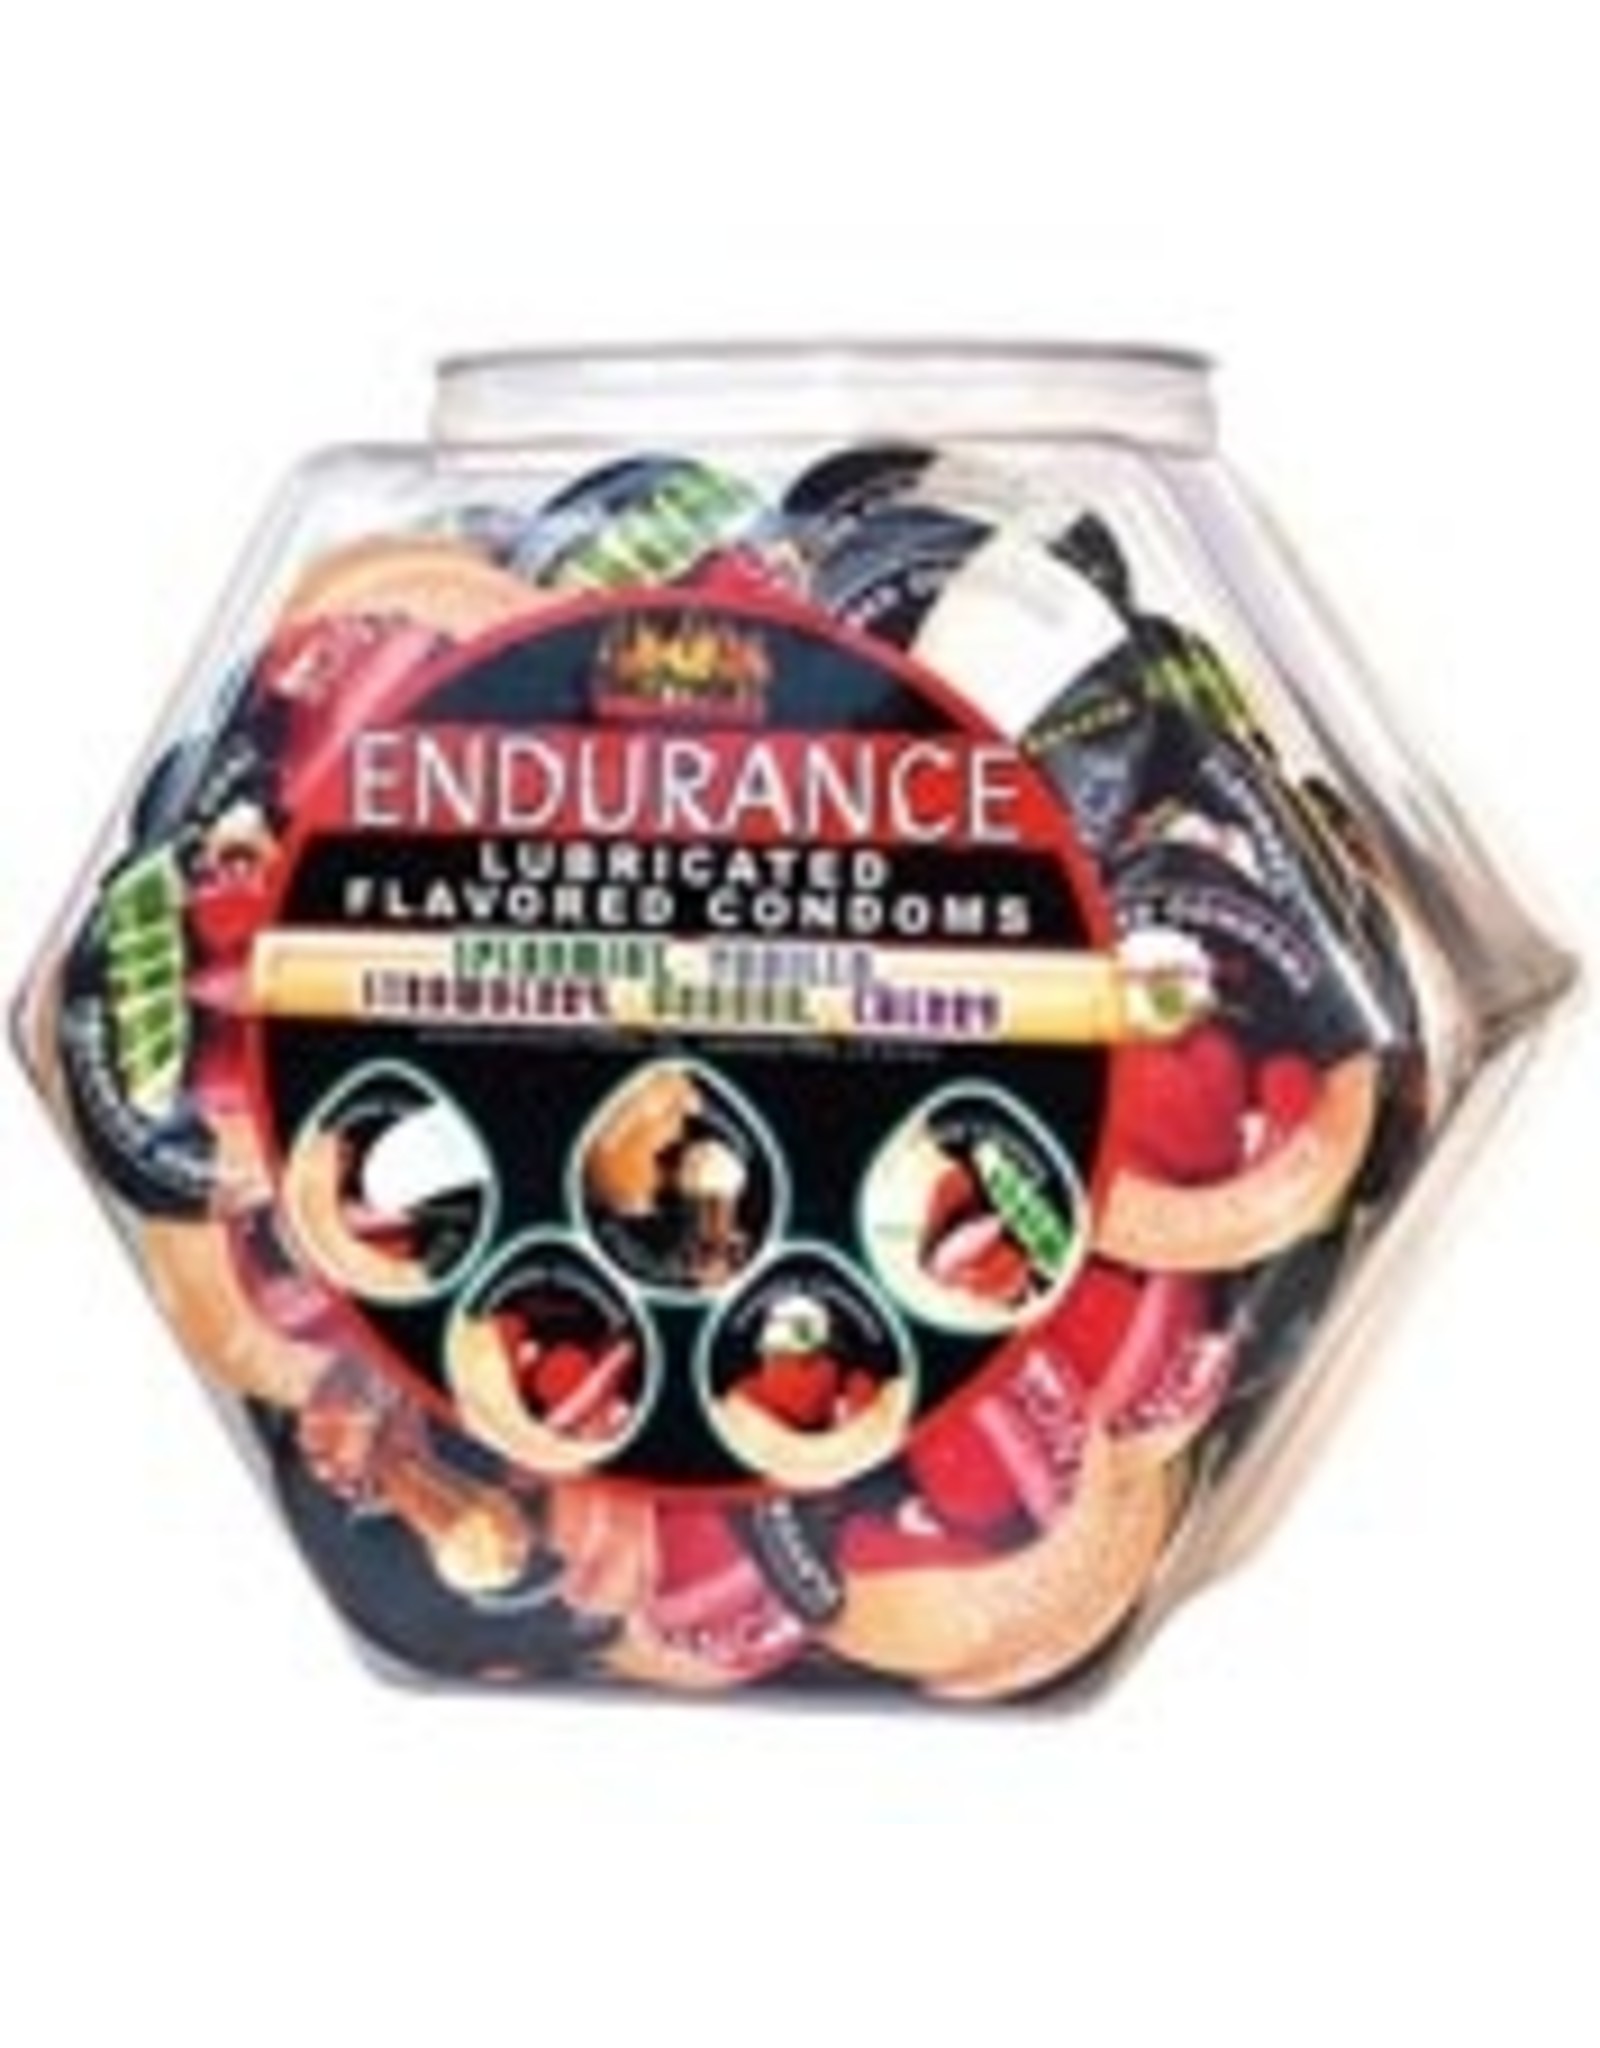 Hott Products Endurance Lubricated Flavored Condoms From Display Bown